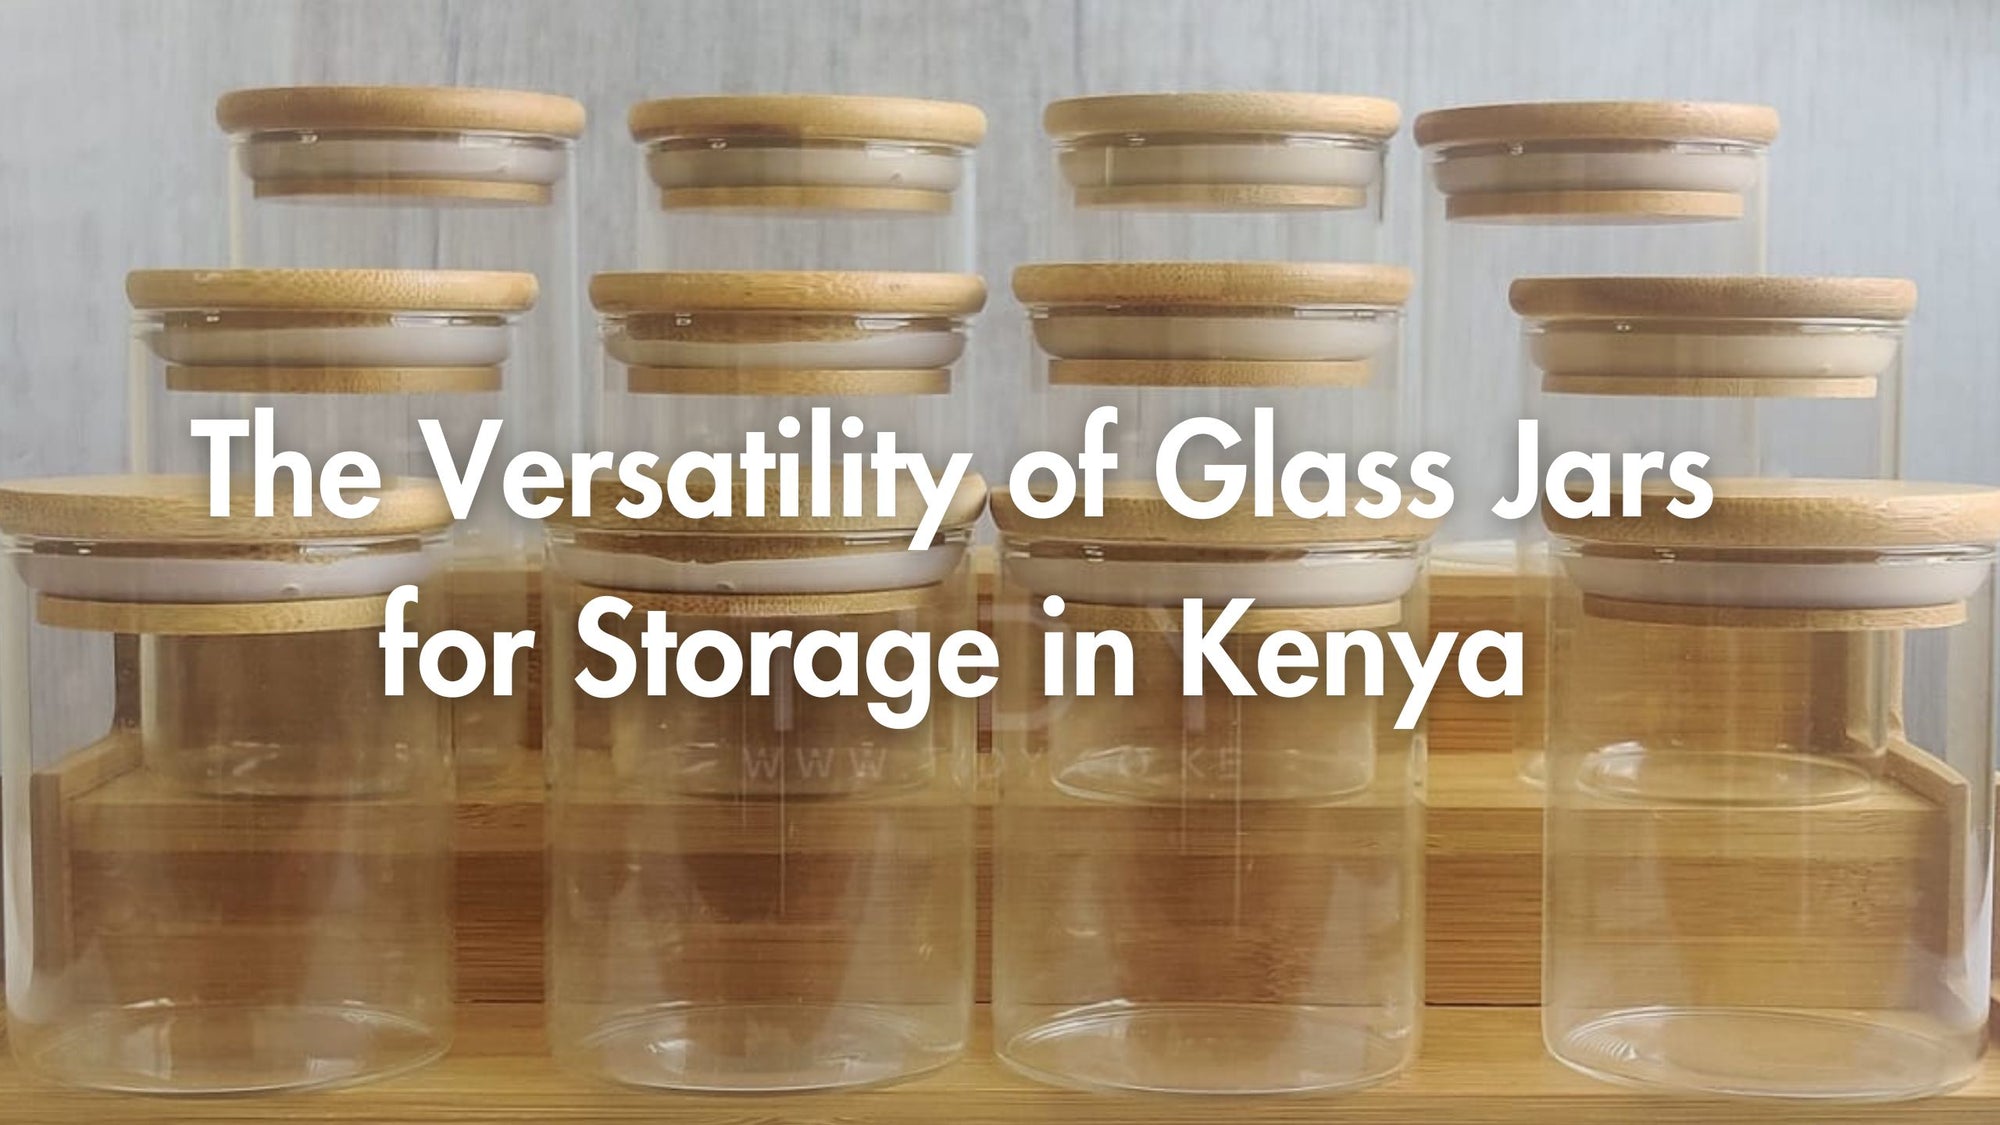 The Versatility of Glass Jars for Storage in Kenya